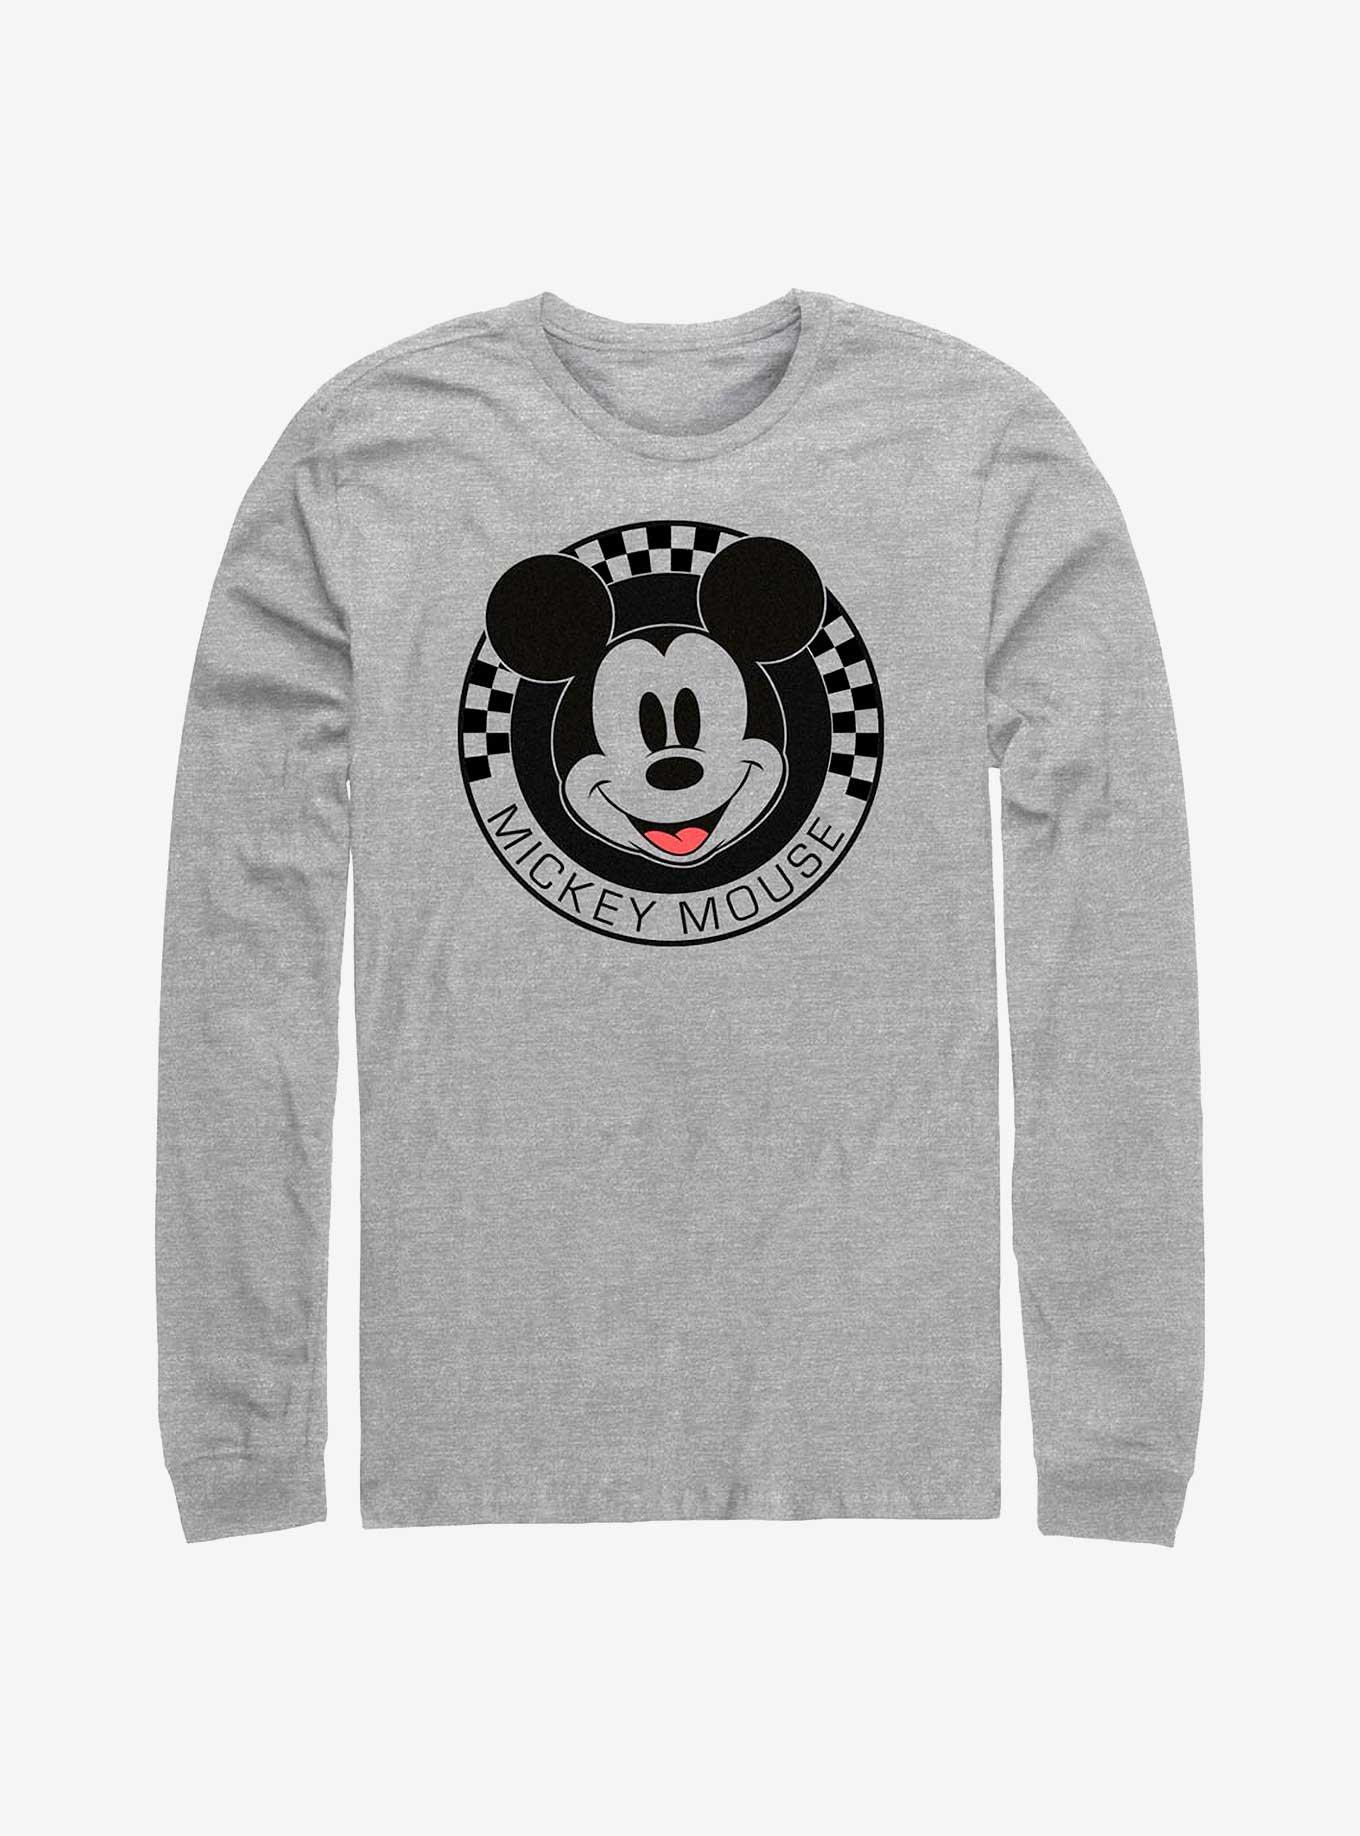 Disney MICKEY MOUSE Black Long Sleeve Top from NEXT NWT 